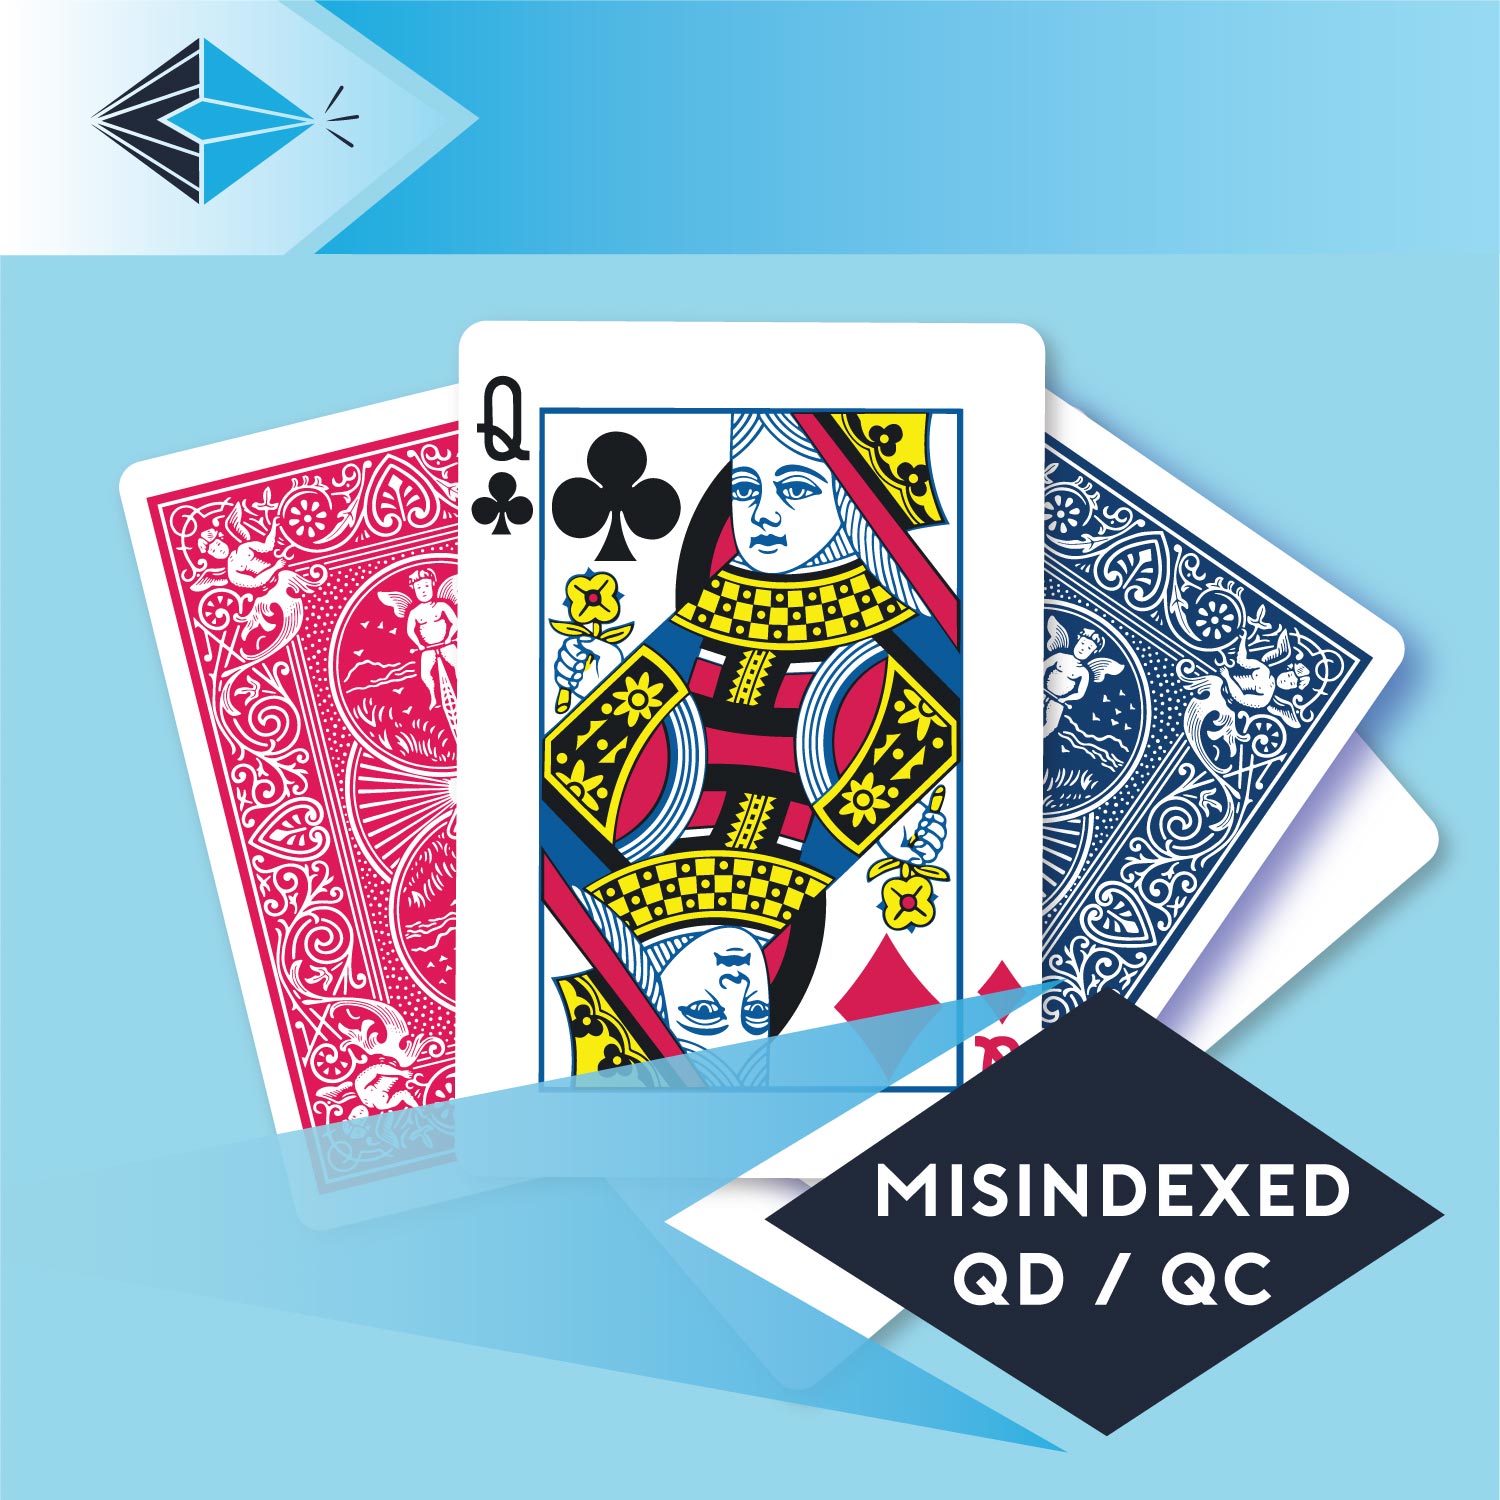 mis-indexed-queen-diamonds-clubs-qd-qc-playing card for magicians printing printers Stockport Manchester UK